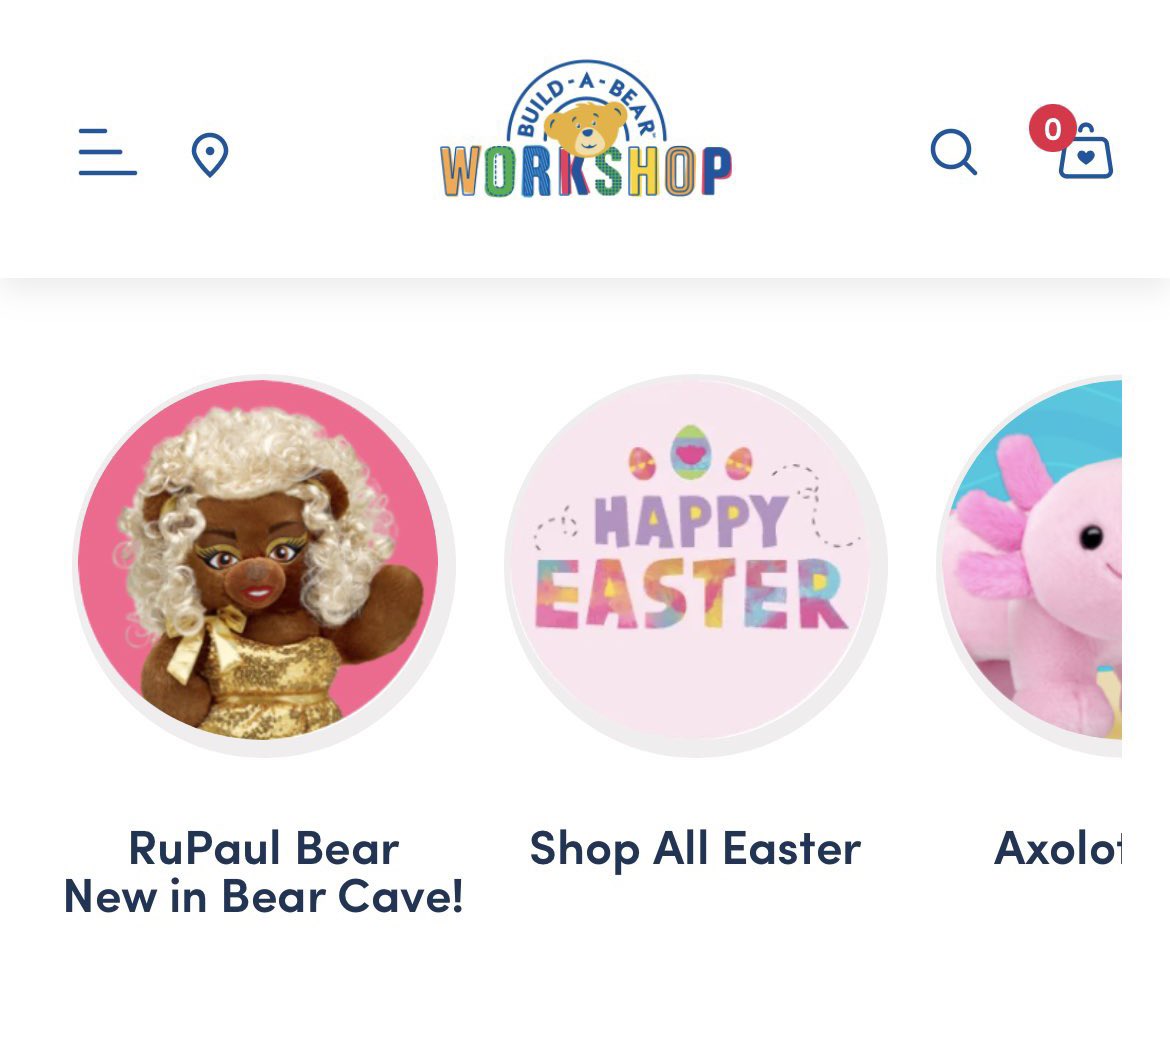 Remember: there’s absolutely no agenda to groom your kids. Don’t be ridiculous. On an unrelated note, @buildabear is selling a drag queen stuffed bear for children.